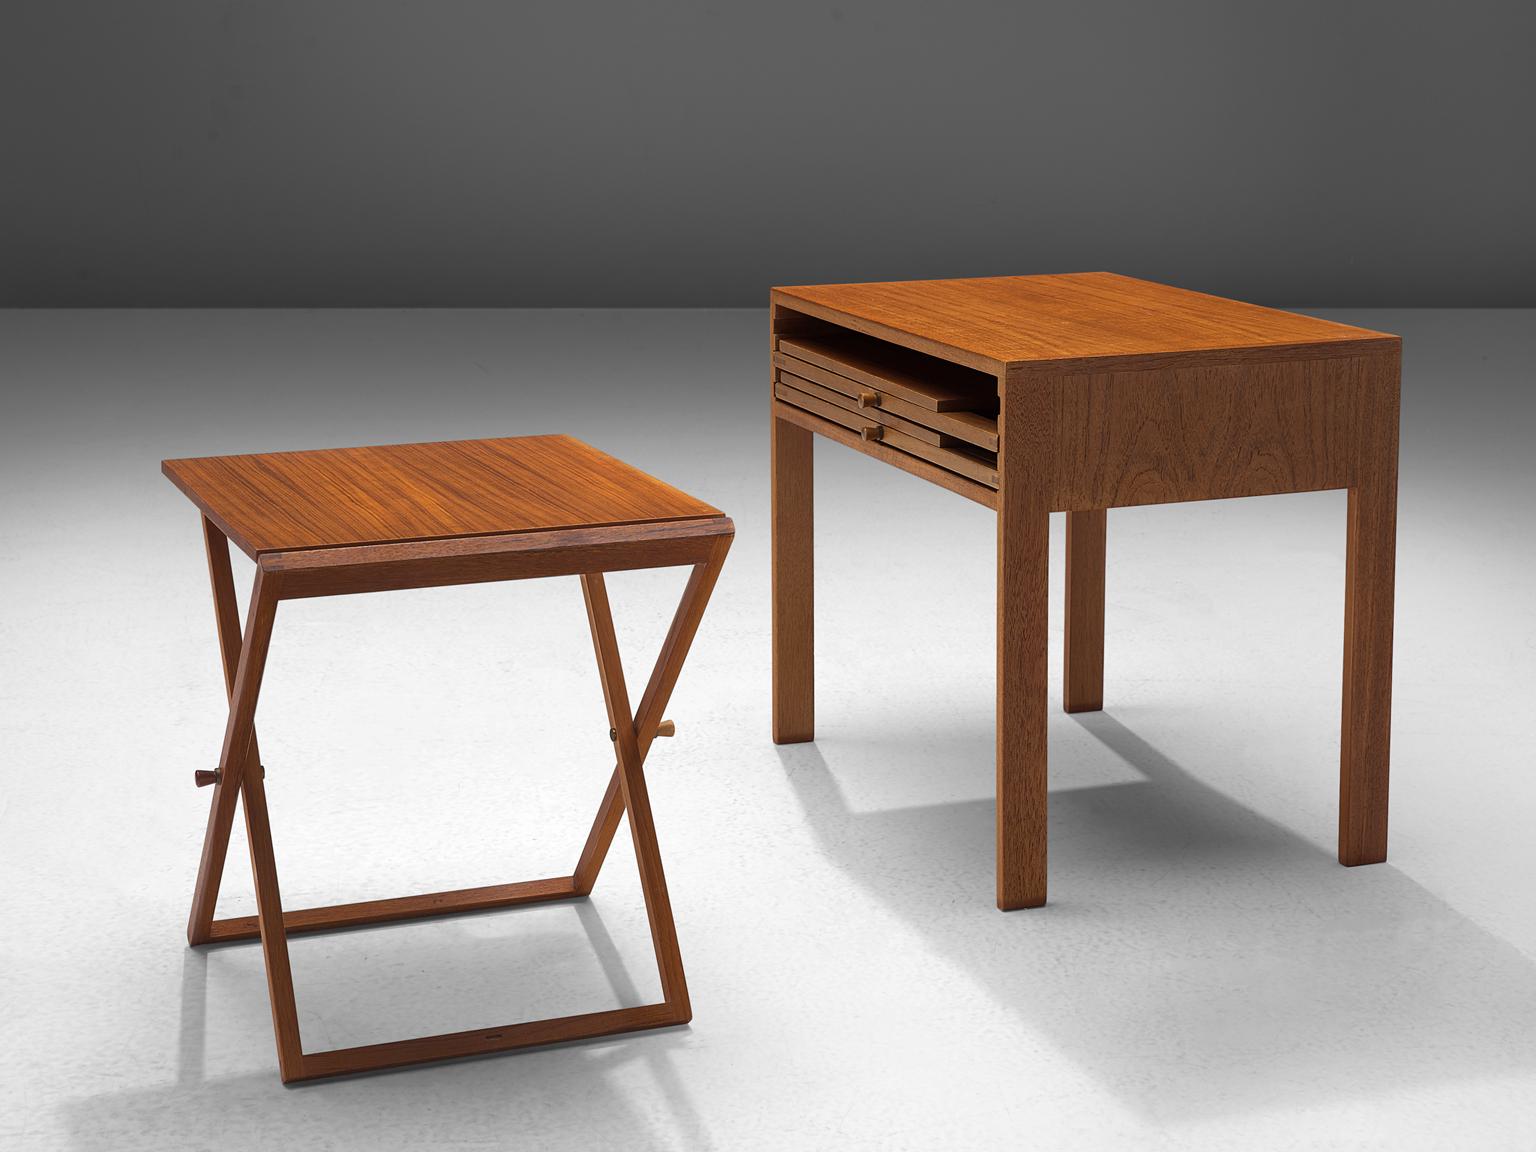 Illum Wikkelsø for Silkenborg, set of three side tables, oak and copper, Denmark, 1950s.

This set is designed by Illum Wikkelsø and made by cabinet maker Silkenborg. The table is executed in oak with detailing such as the hinges in copper. The